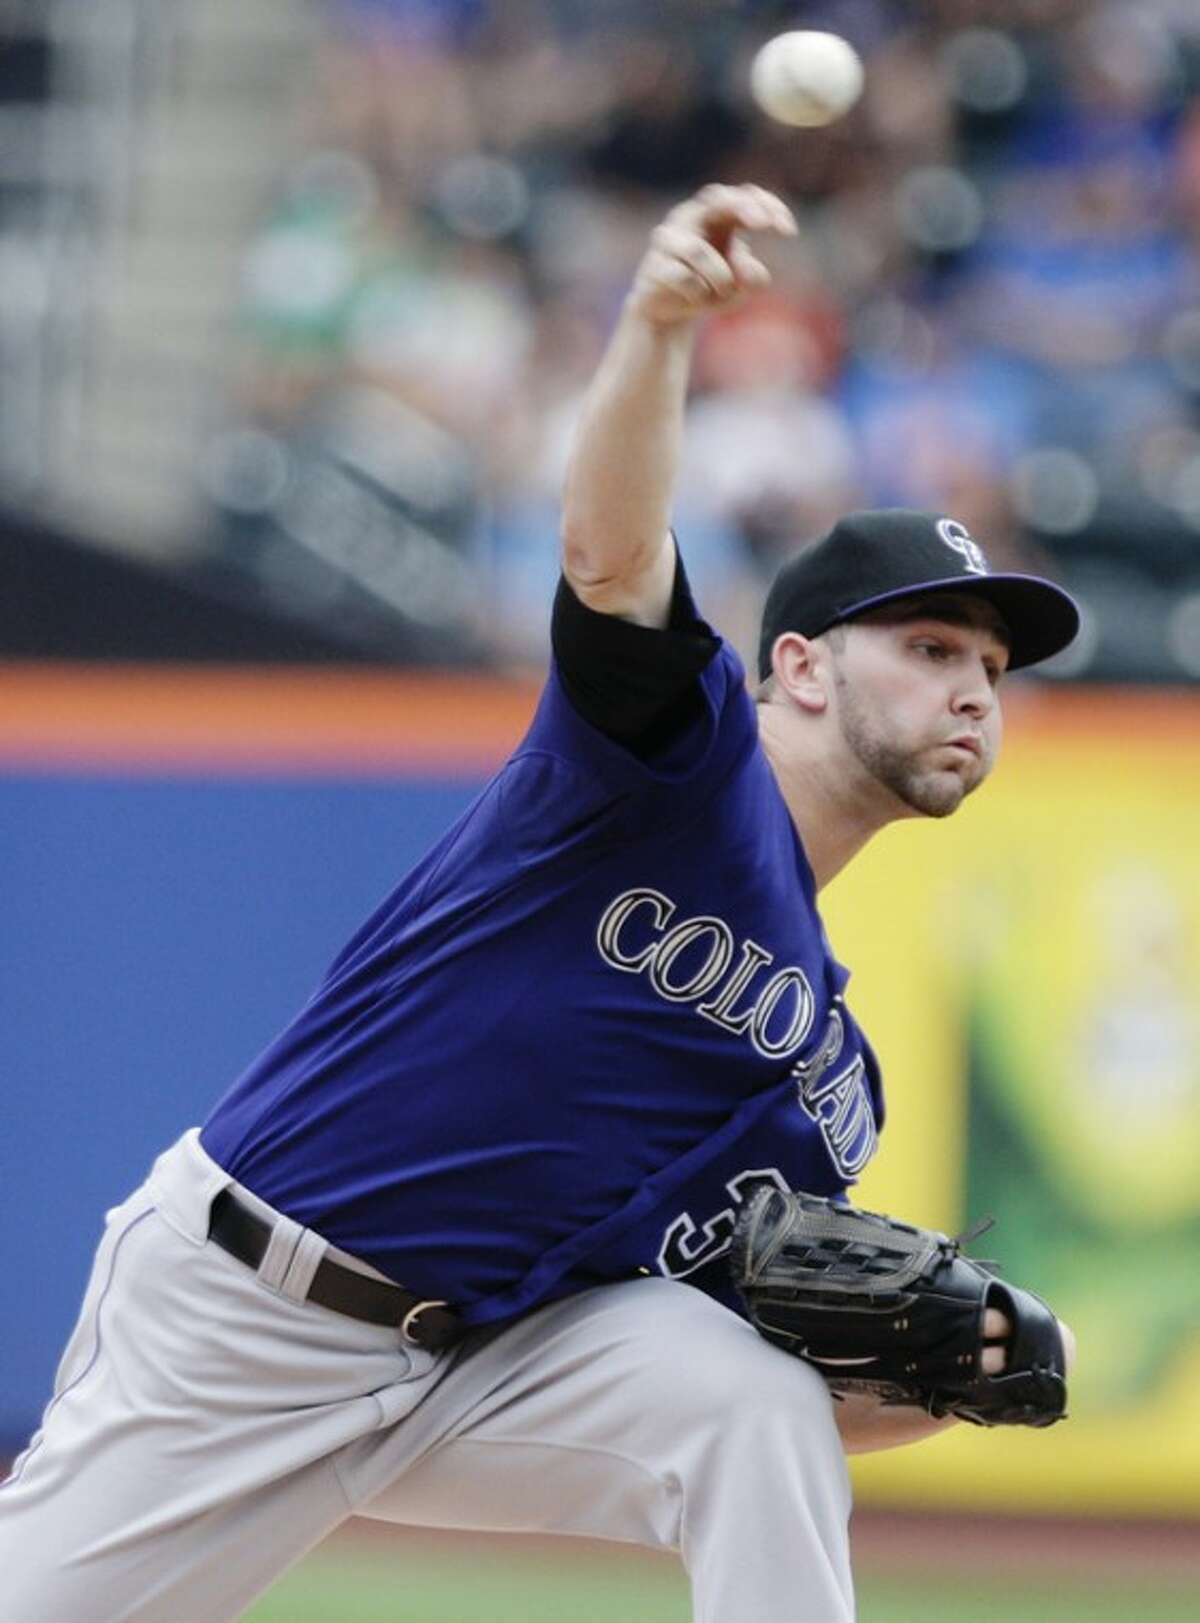 Colorado Rockies' Tyler Chatwood delivers a pitch during the first inning of a baseball game against the New York Mets, Thursday, Aug. 23, 2012, in New York. (AP Photo/Frank Franklin II)